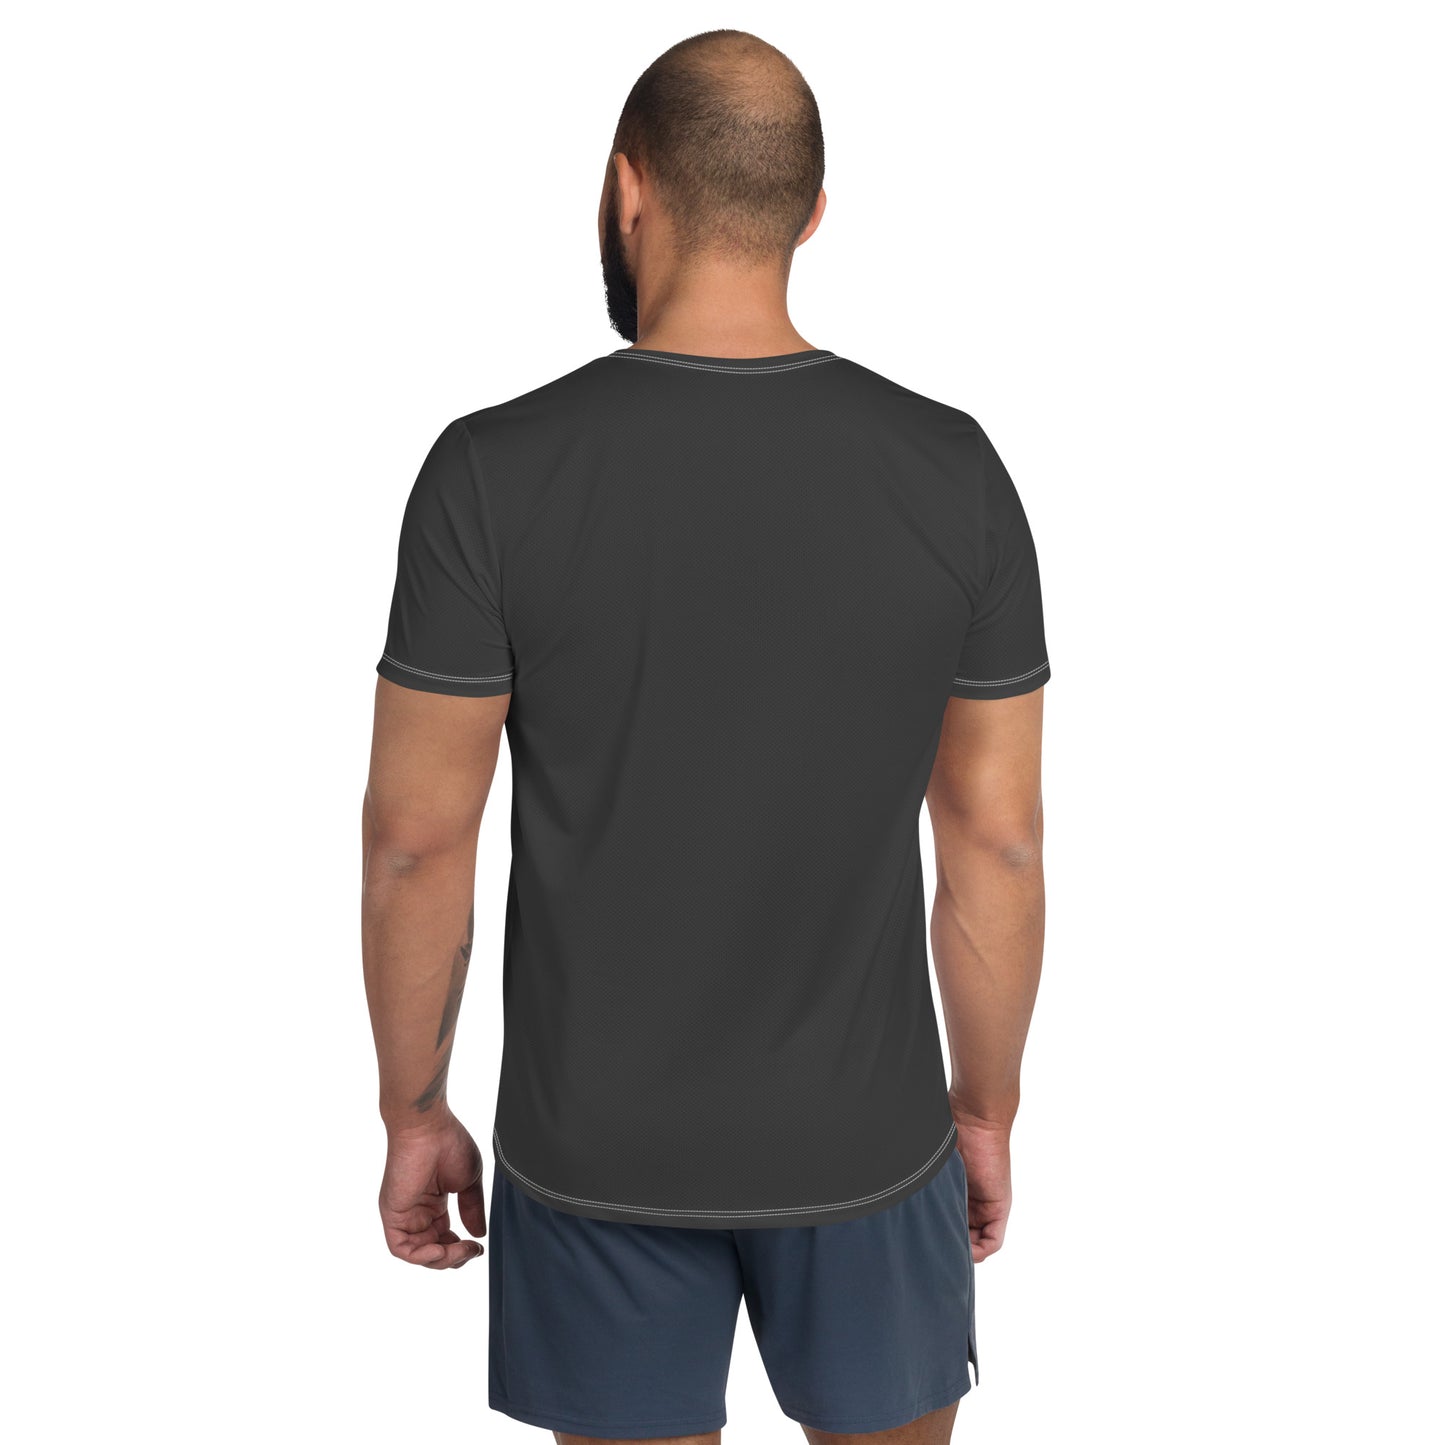 TIME OF VIBES - Men's Athletic T-shirt (Eclipse) - €45.00